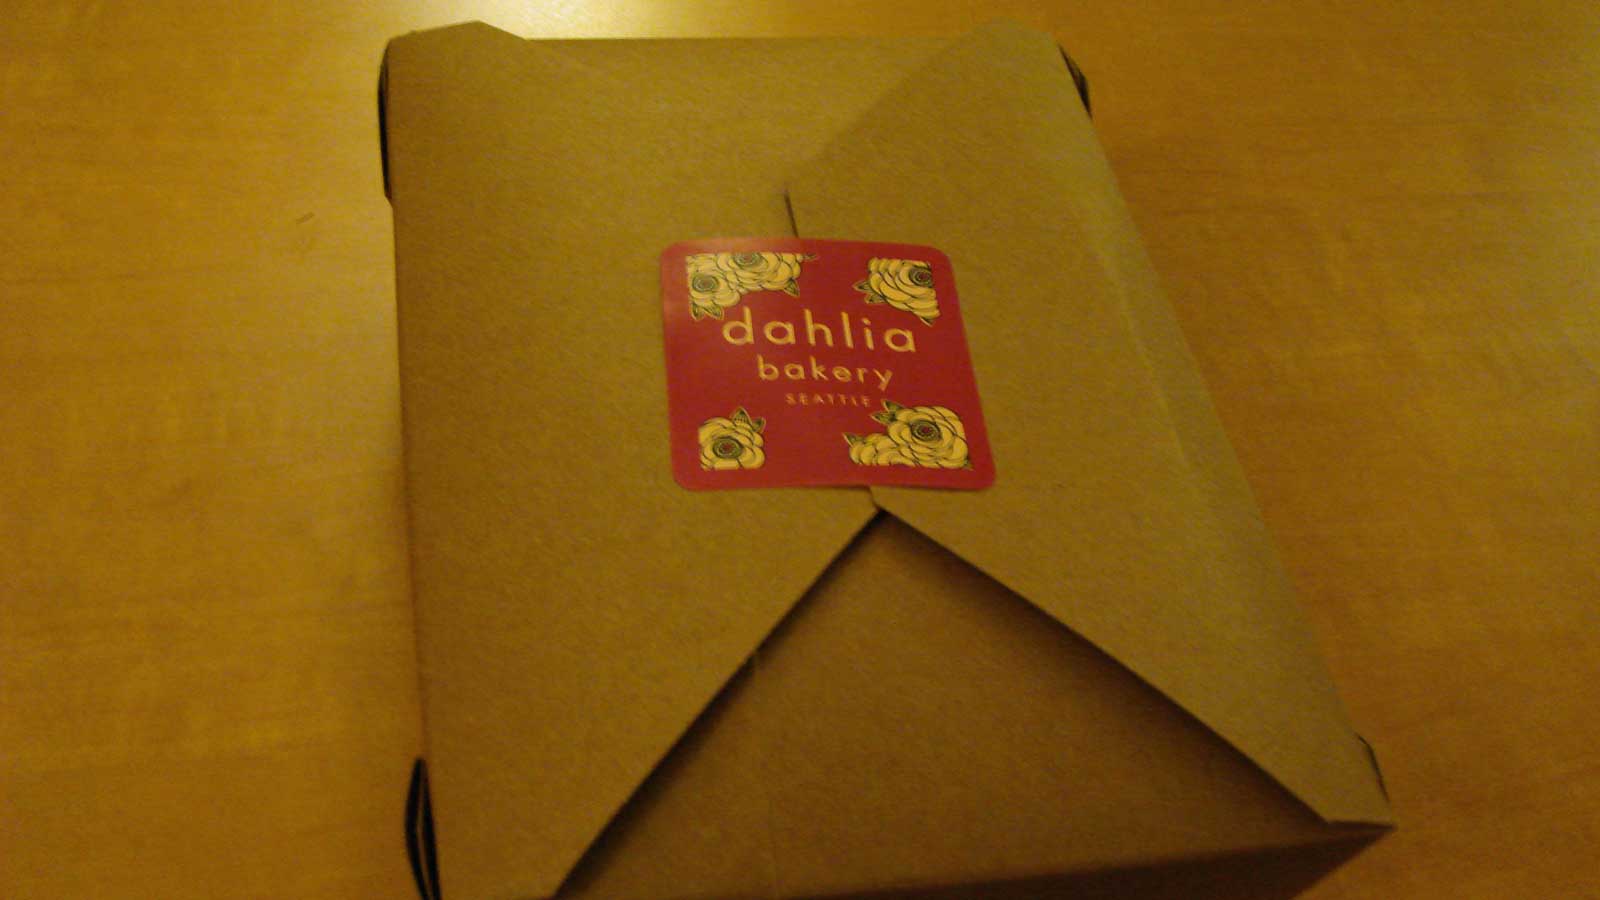 A box from Dahlia bakery with pie inside